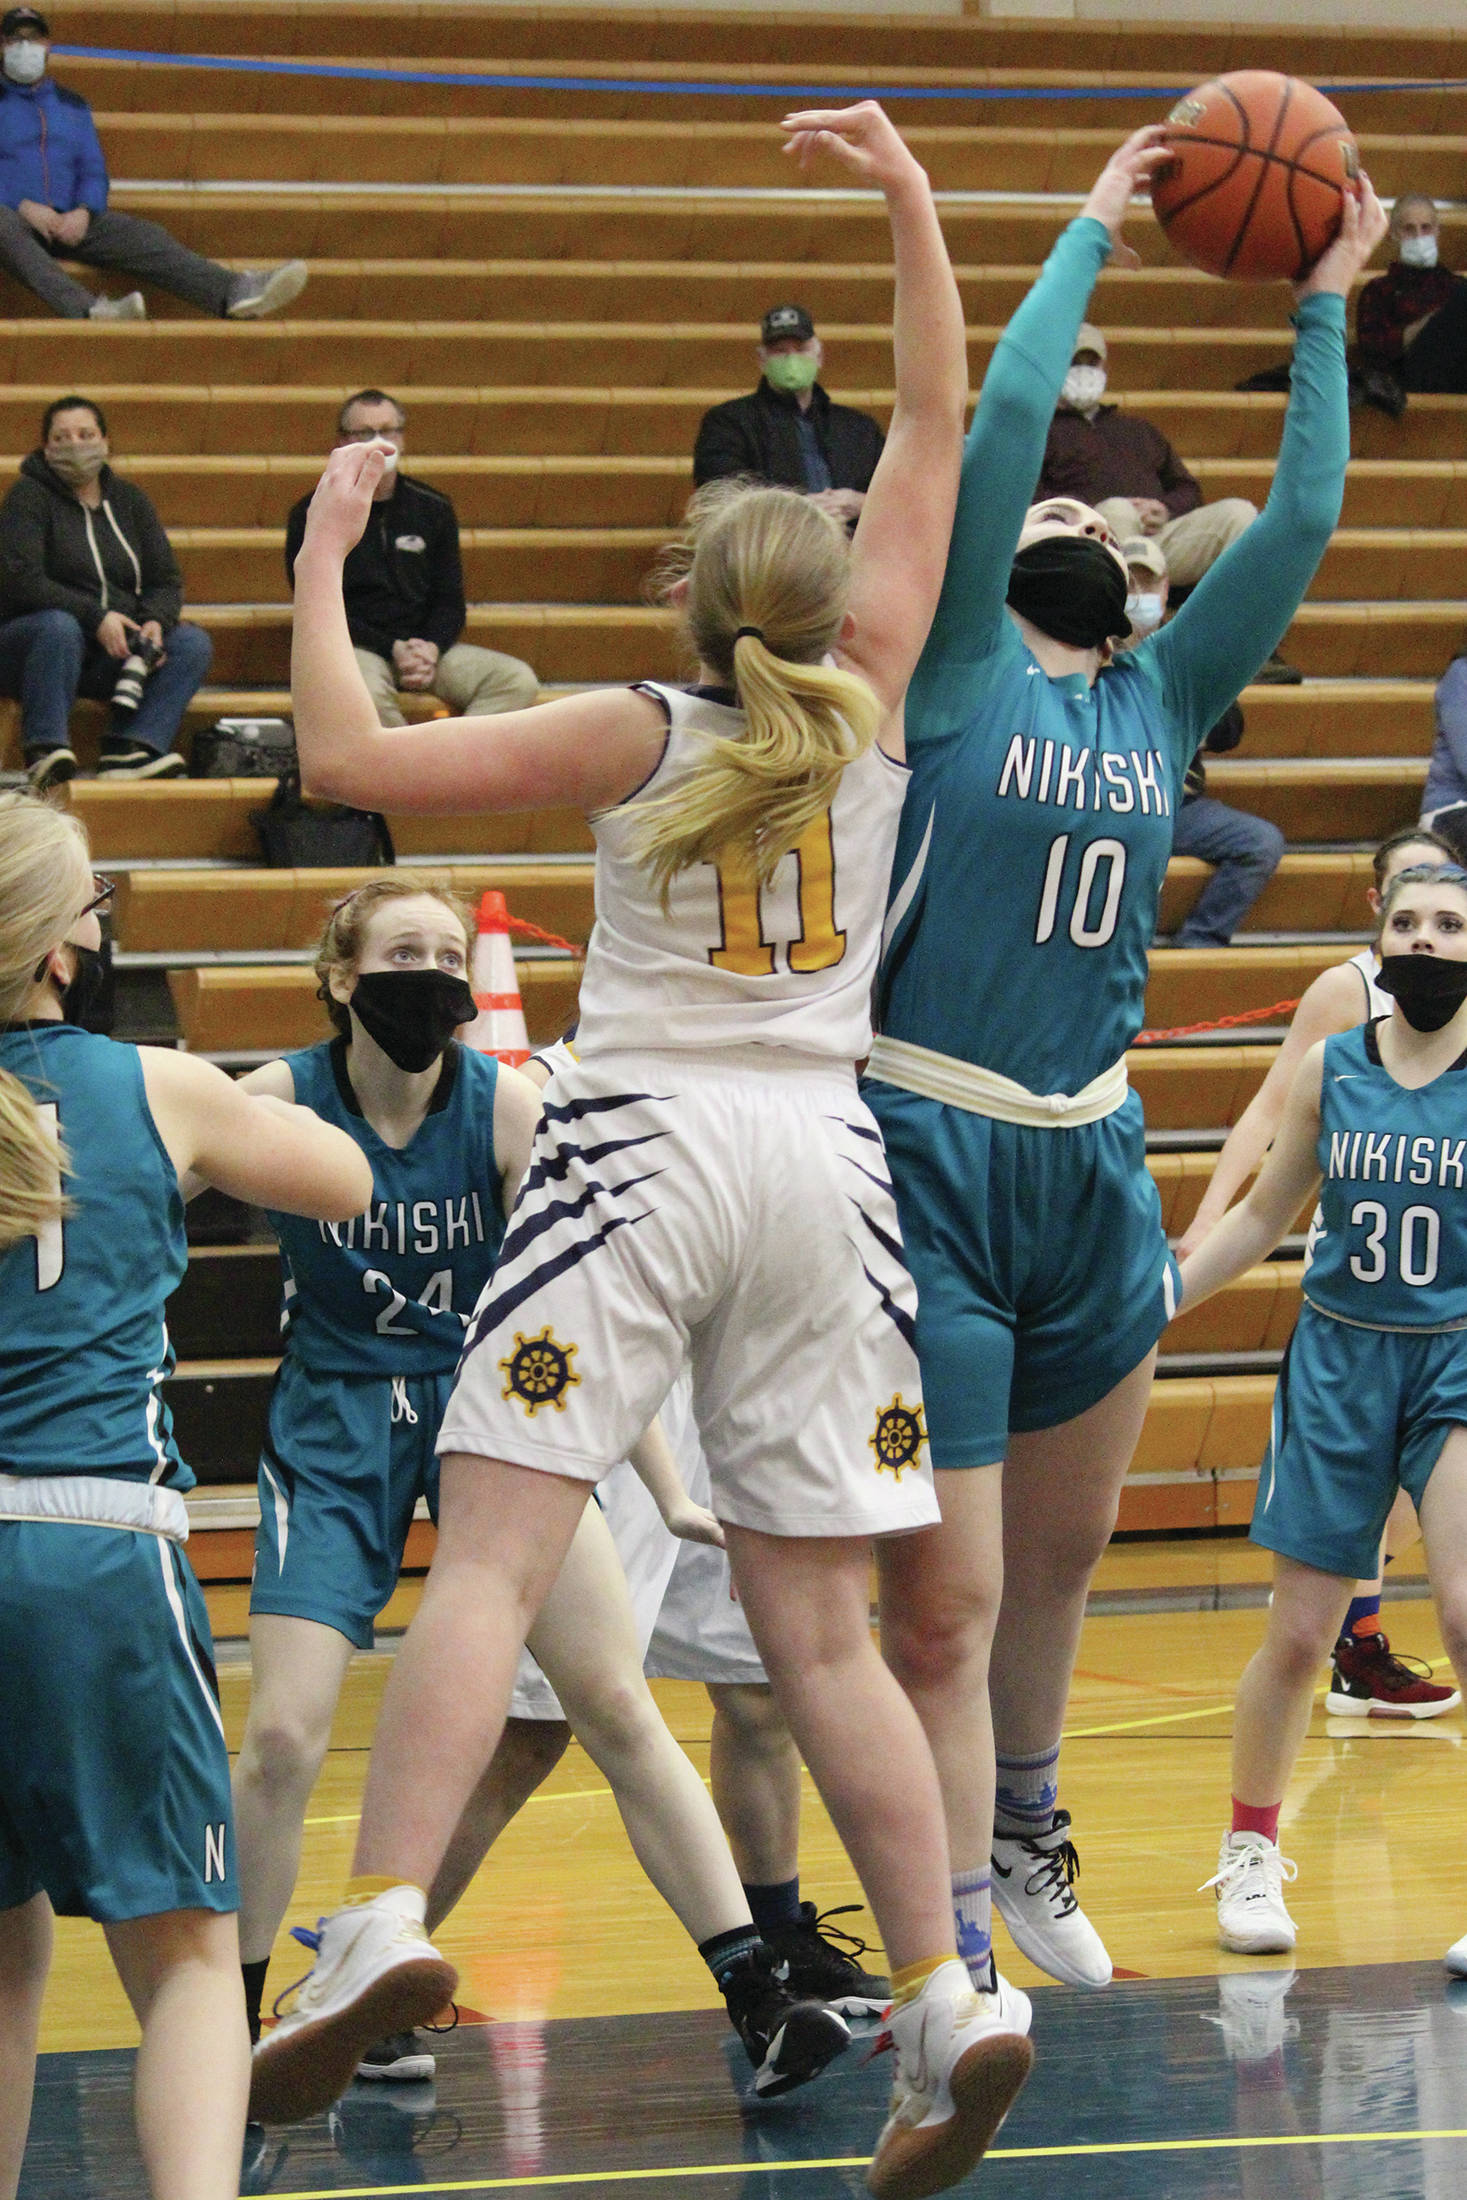 Lillian Carstens snags a rebound during a Tuesday, Feb. 2, 2021 basketball game between Nikiski and the Mariners at the Alice Witte Gymnasium in Homer, Alaska. (Photo by Megan Pacer/Homer News)